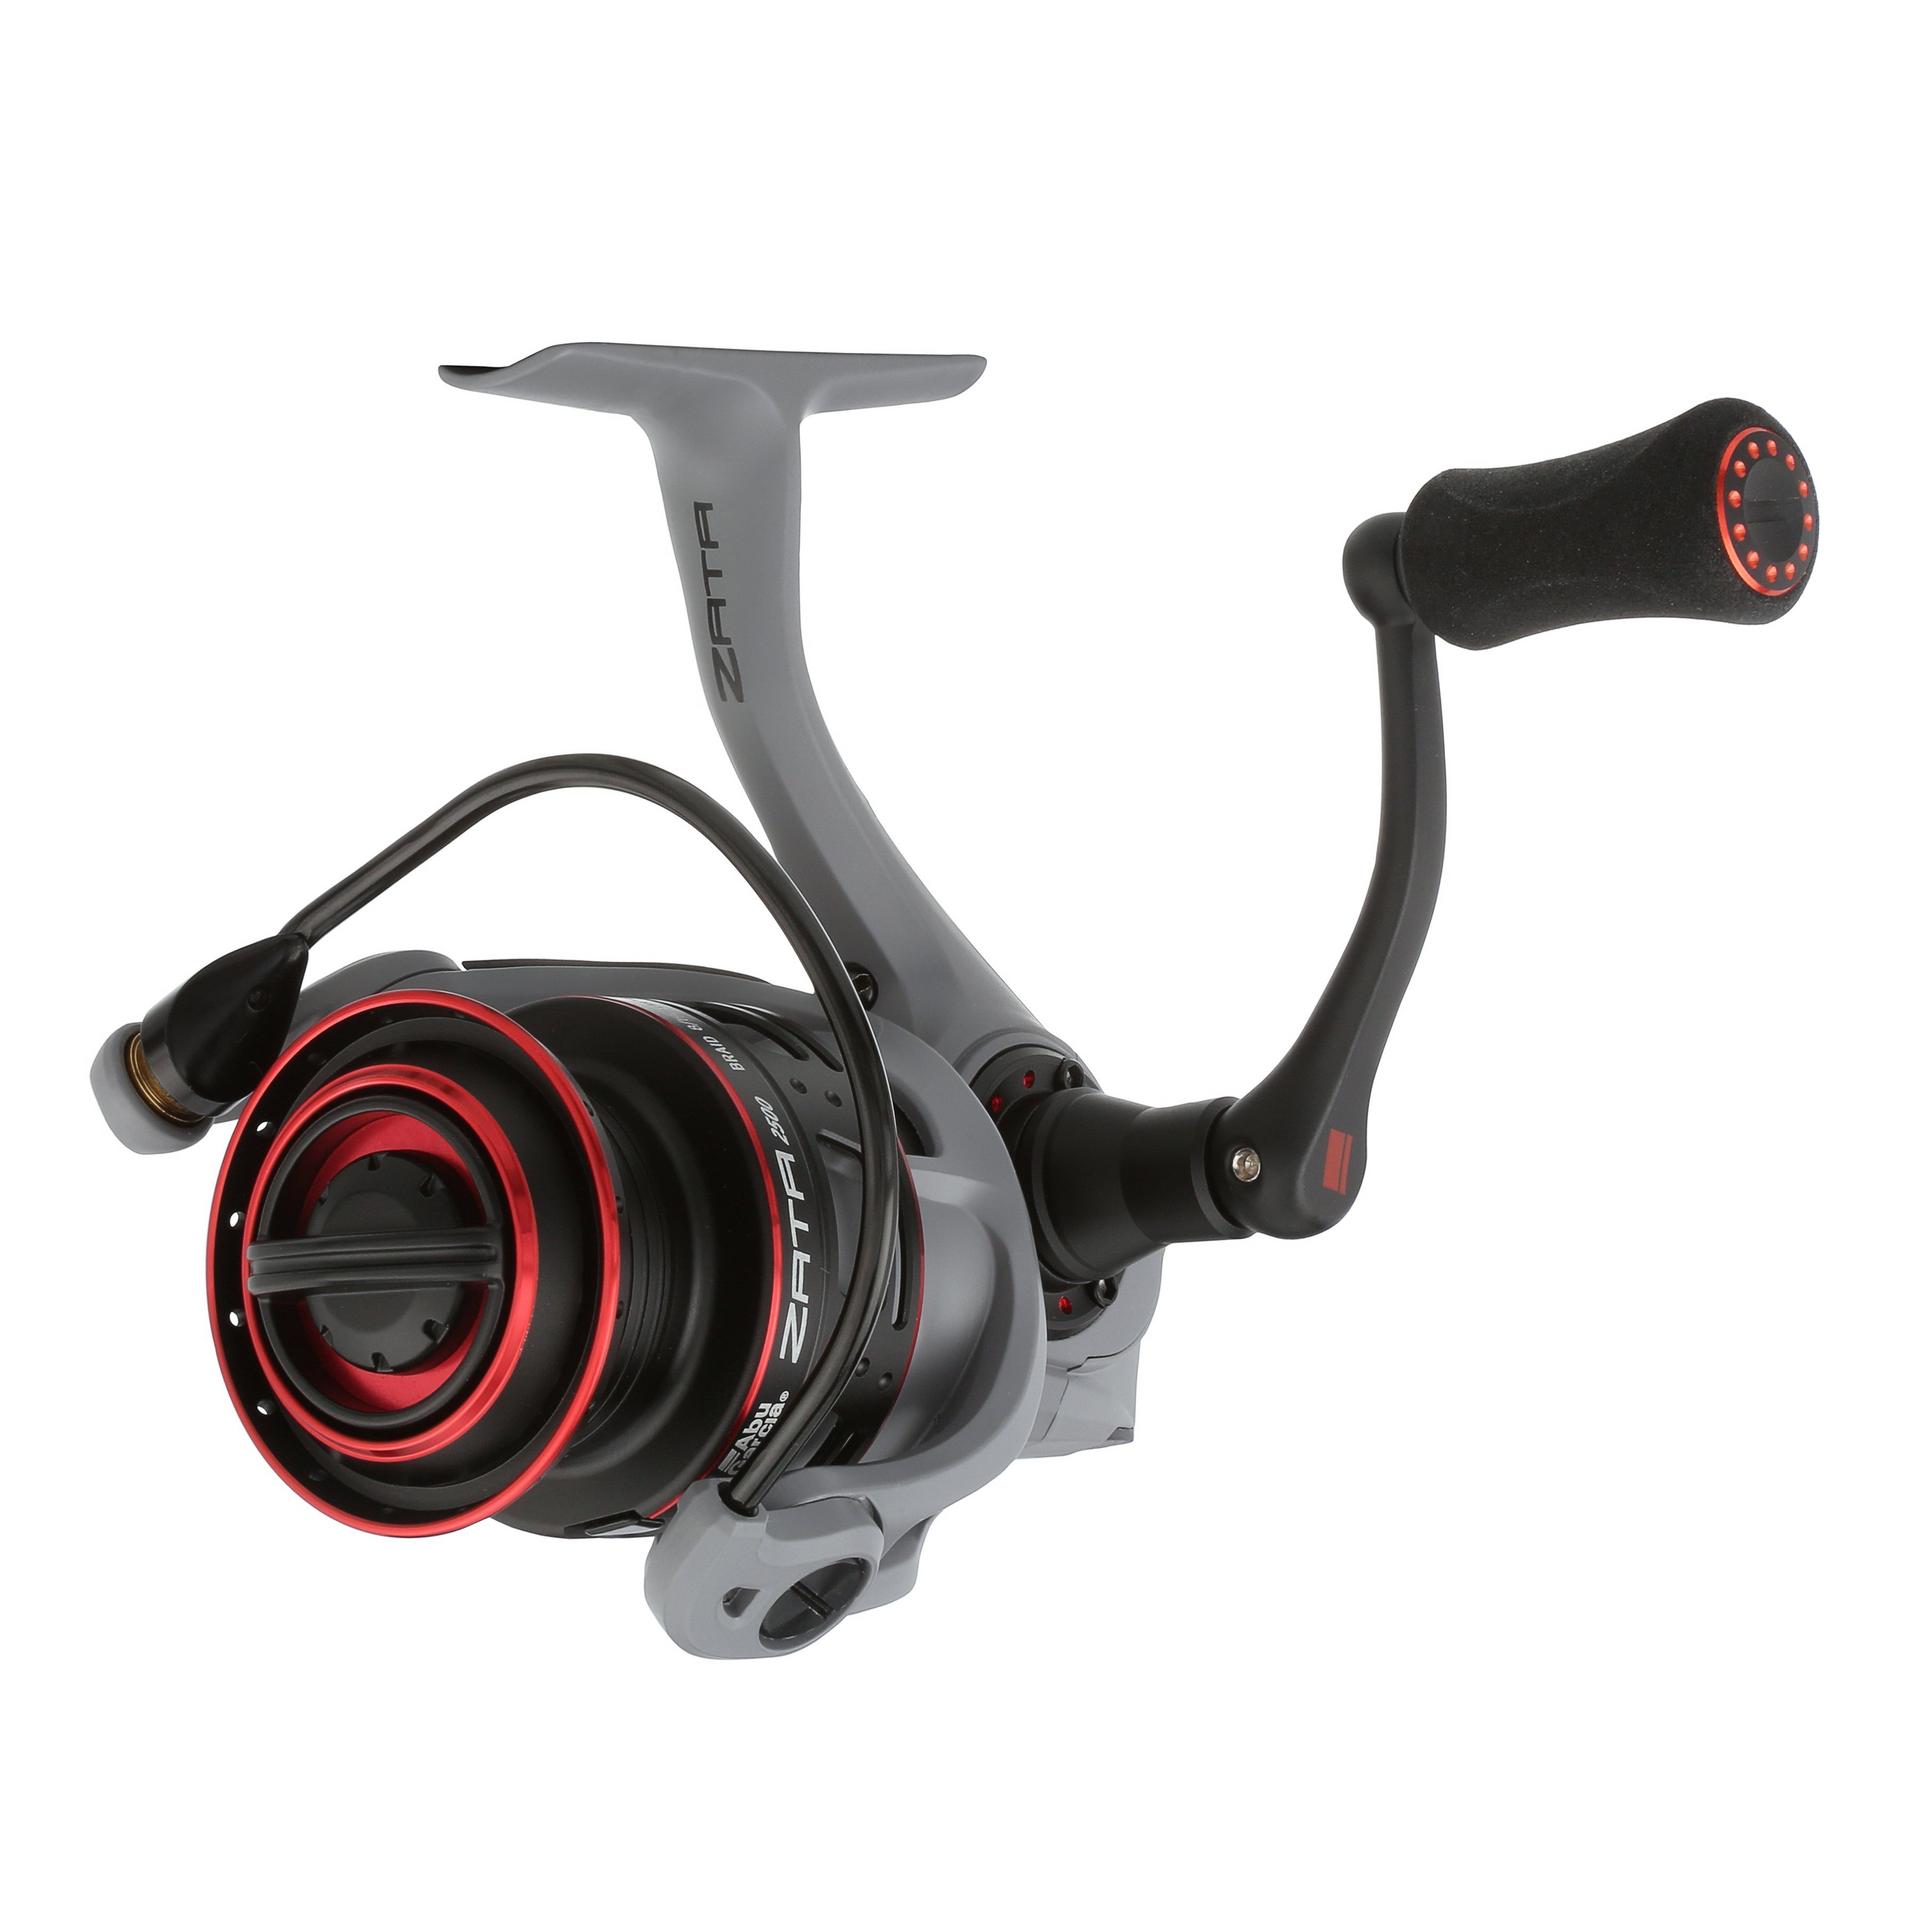  Abu Garcia Zata Baitcast Low Profile Fishing Reel, Compact,  Lightweight Fishing Reel, Graphite Frame and Sideplates, Left Handle  Position, Bent Handle Design : Sports & Outdoors